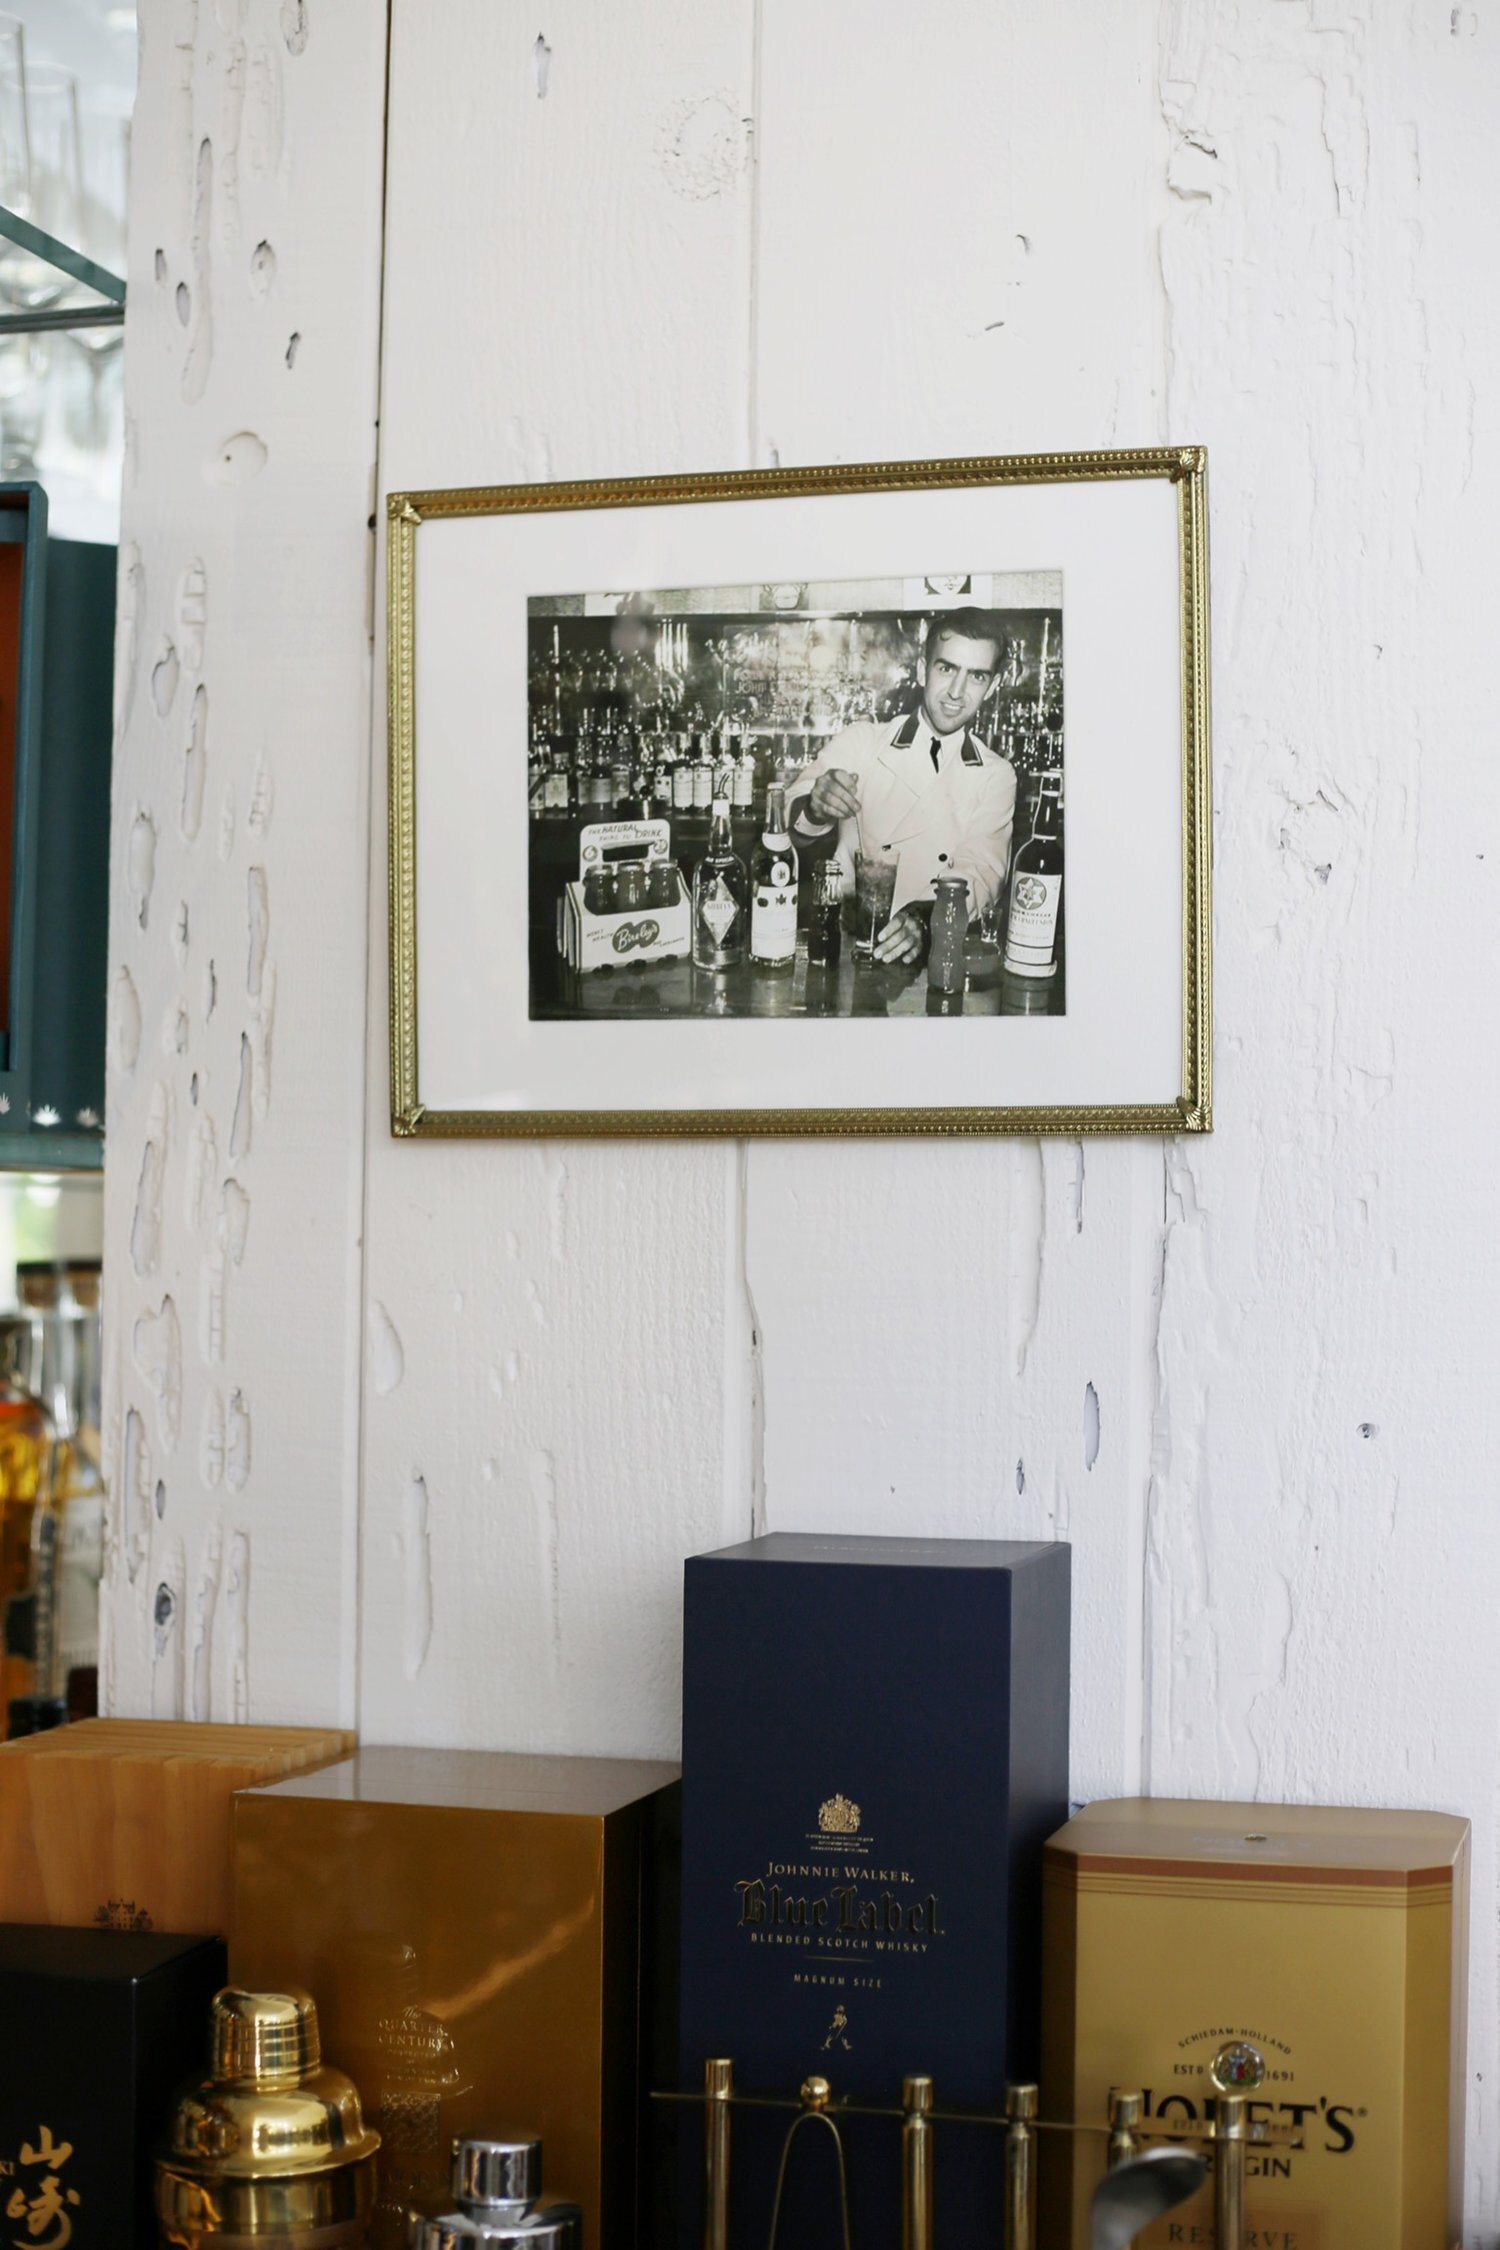  Original photography of Lloyd Vance, grandfather of Jeff Vance, bartending at a bar in Hollywood in the 1940s hanging up in original bar by Jeff Vance. 